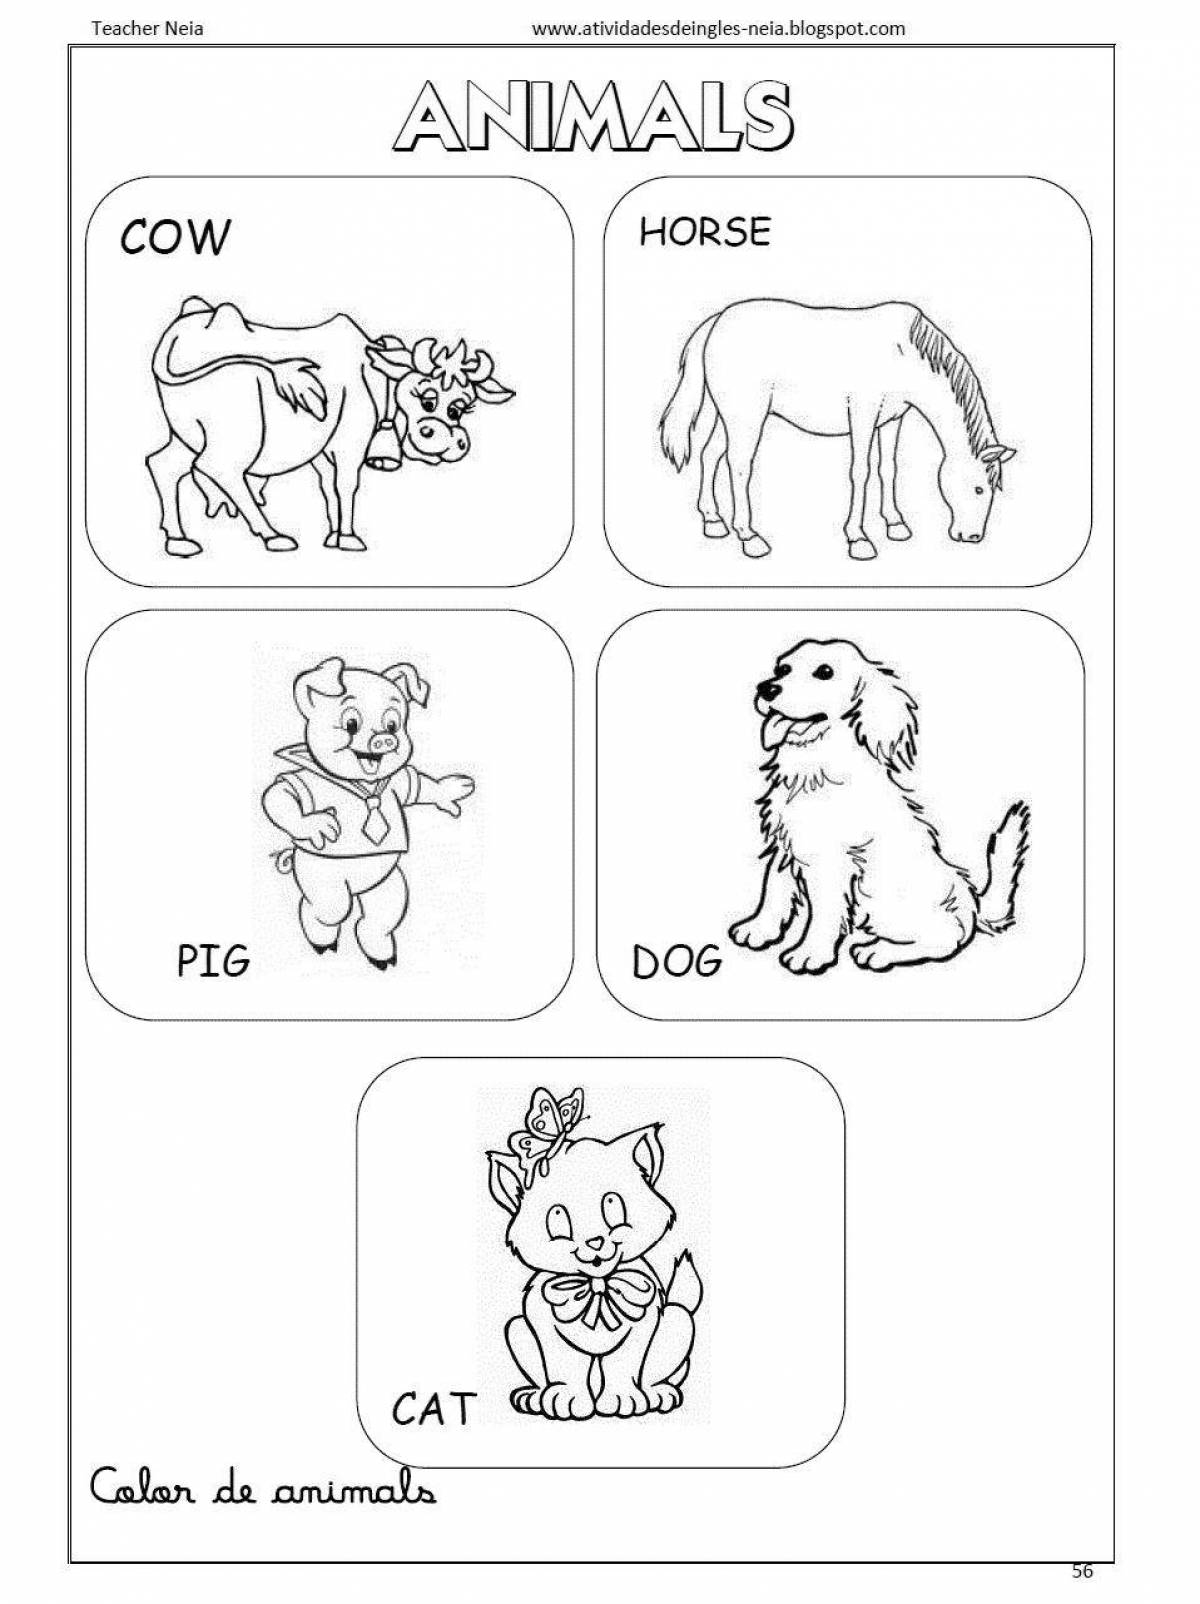 Bright English Animal Coloring Page for Juniors